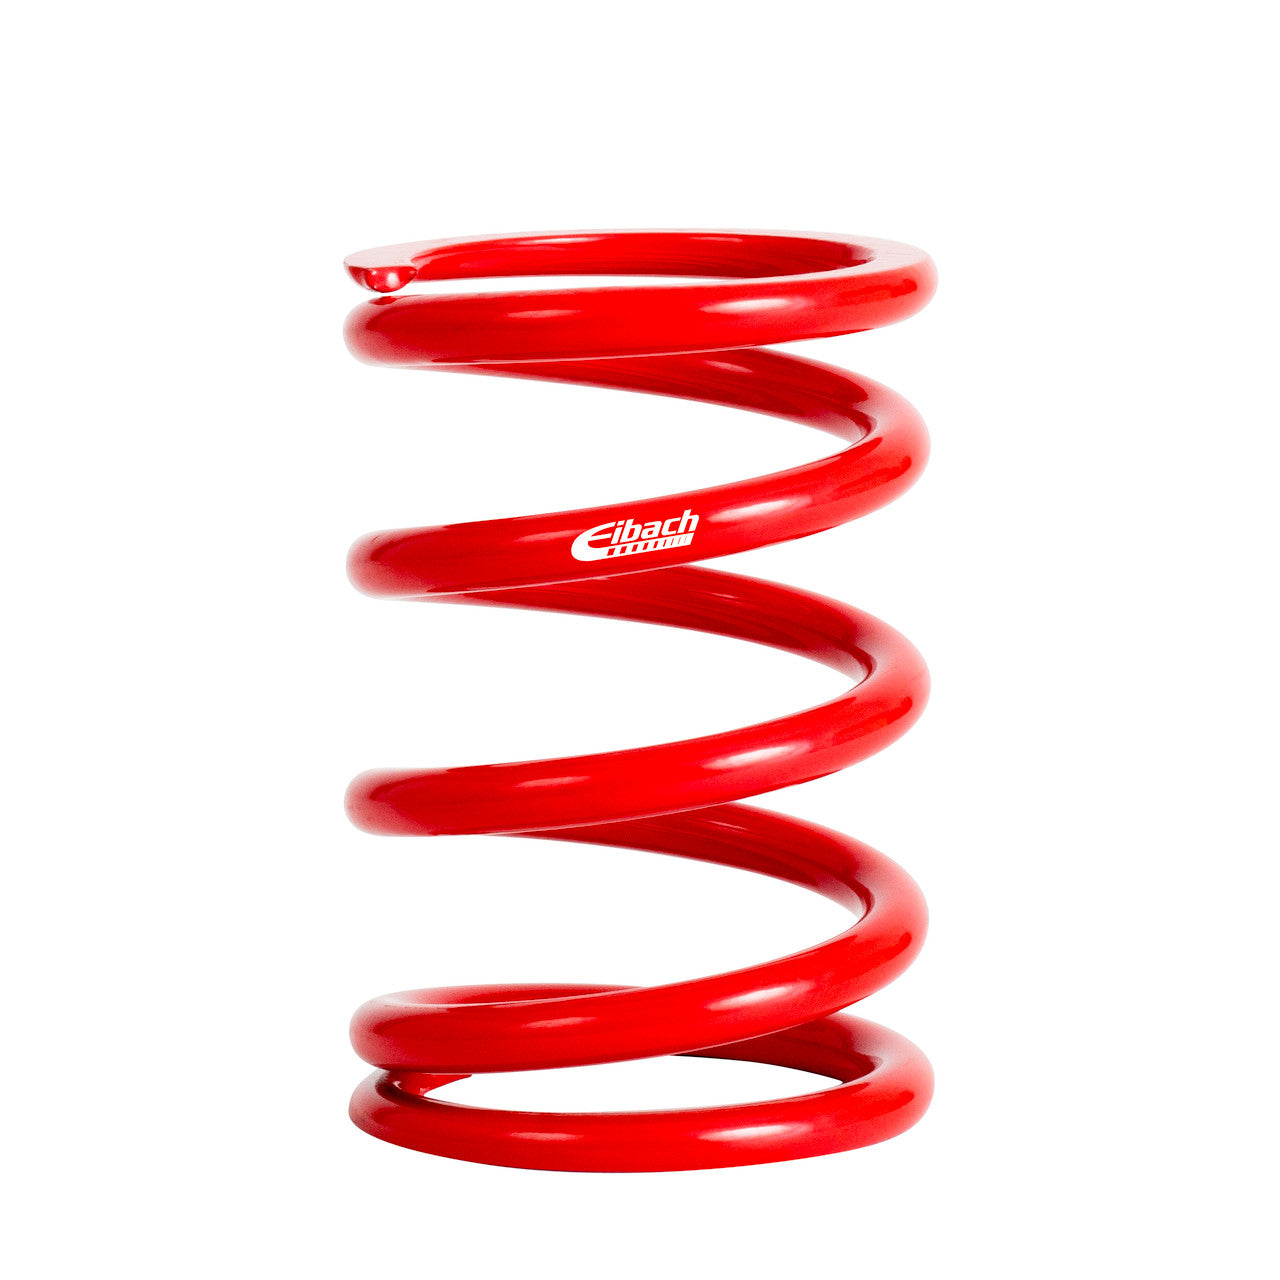 Eibach Metric Coilover Spring - 60MM I.D. 80-60-0160